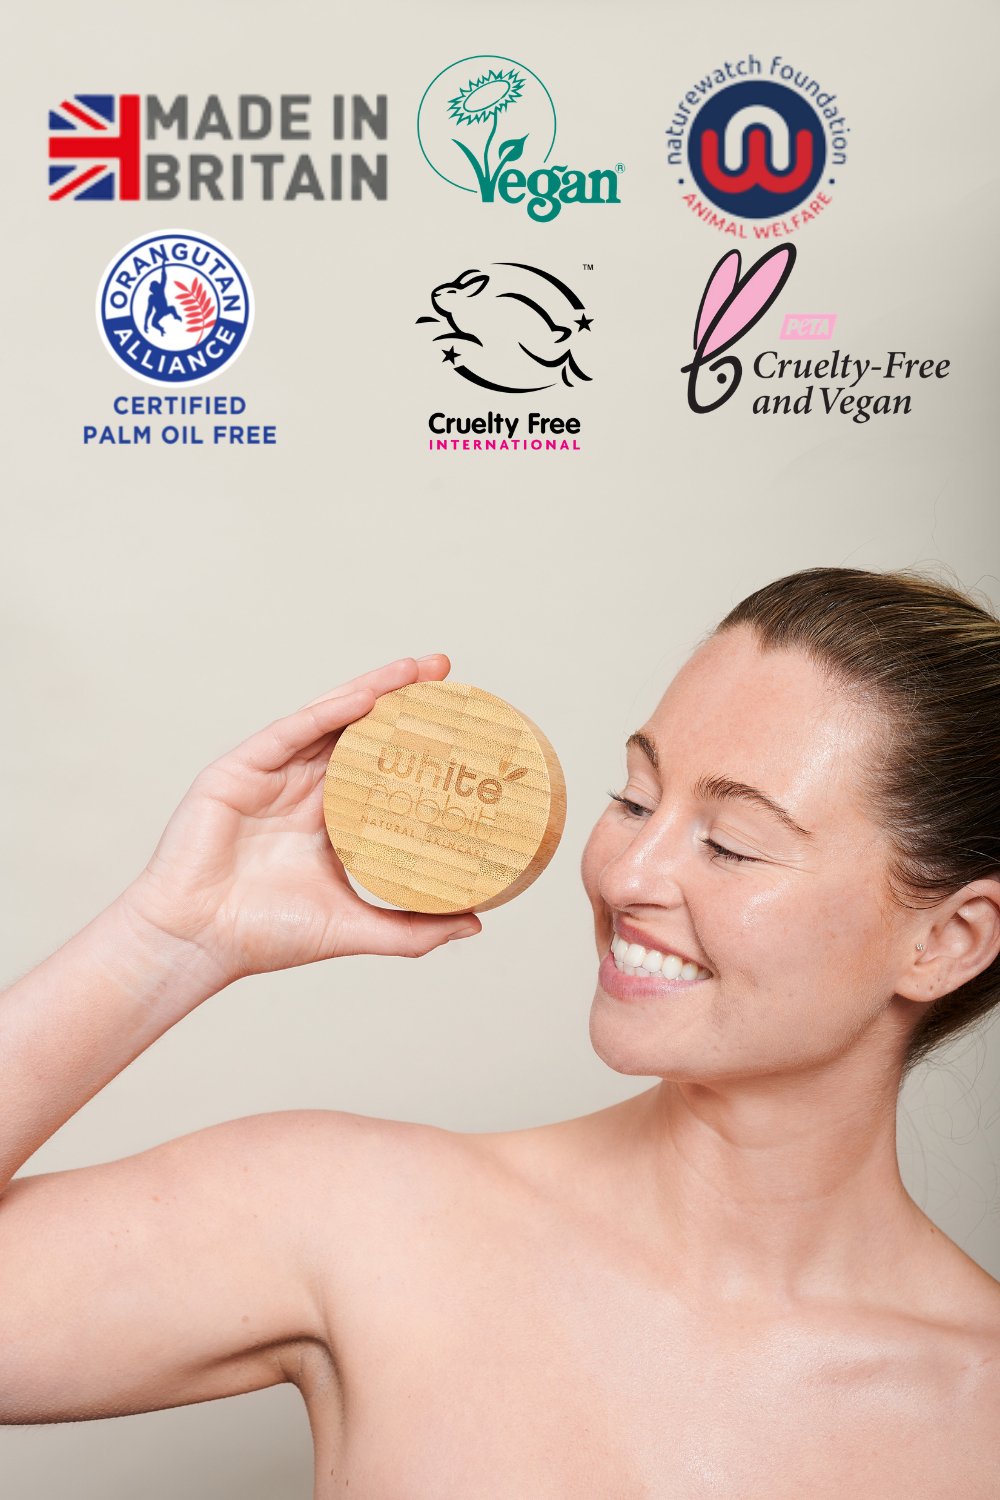 White Rabbit Skincare - What our certifications mean - White Rabbit Skin Care